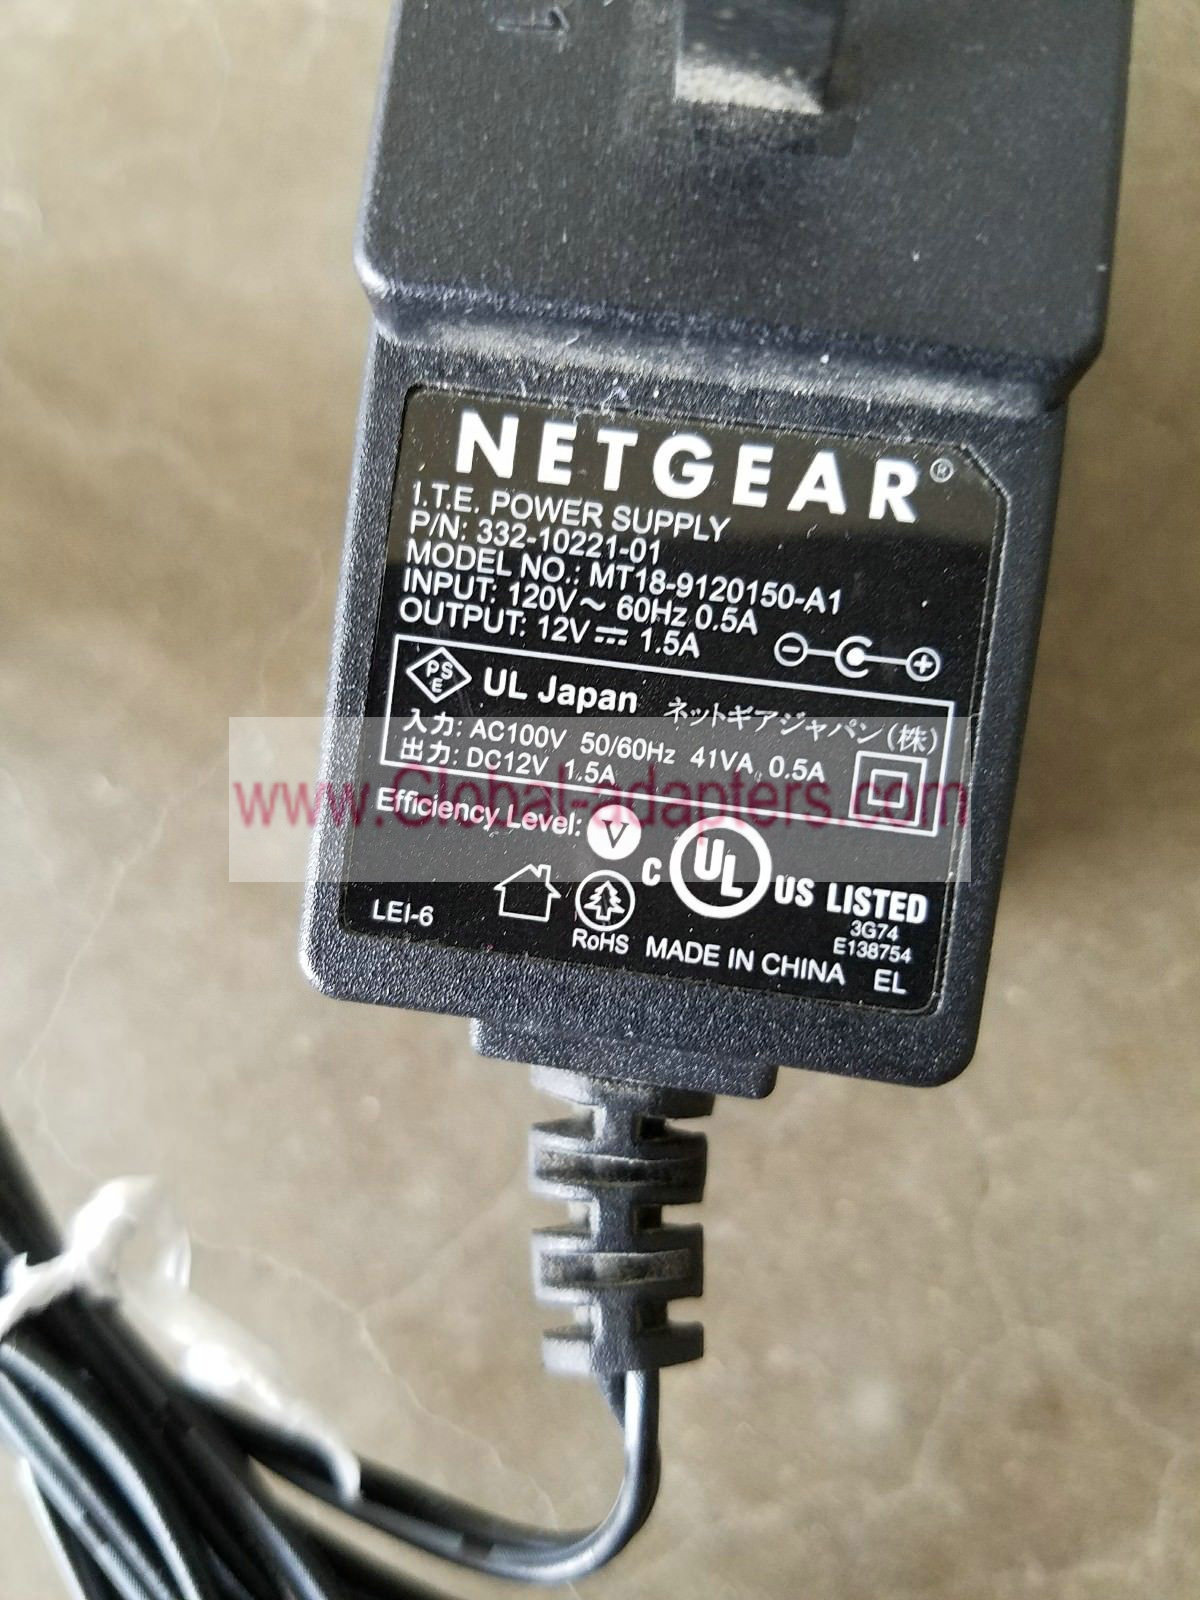 New Netgear 332-10221-01 MT18-9120150-A1 Power Supply 12V DC 1.5A ac adpater - Click Image to Close